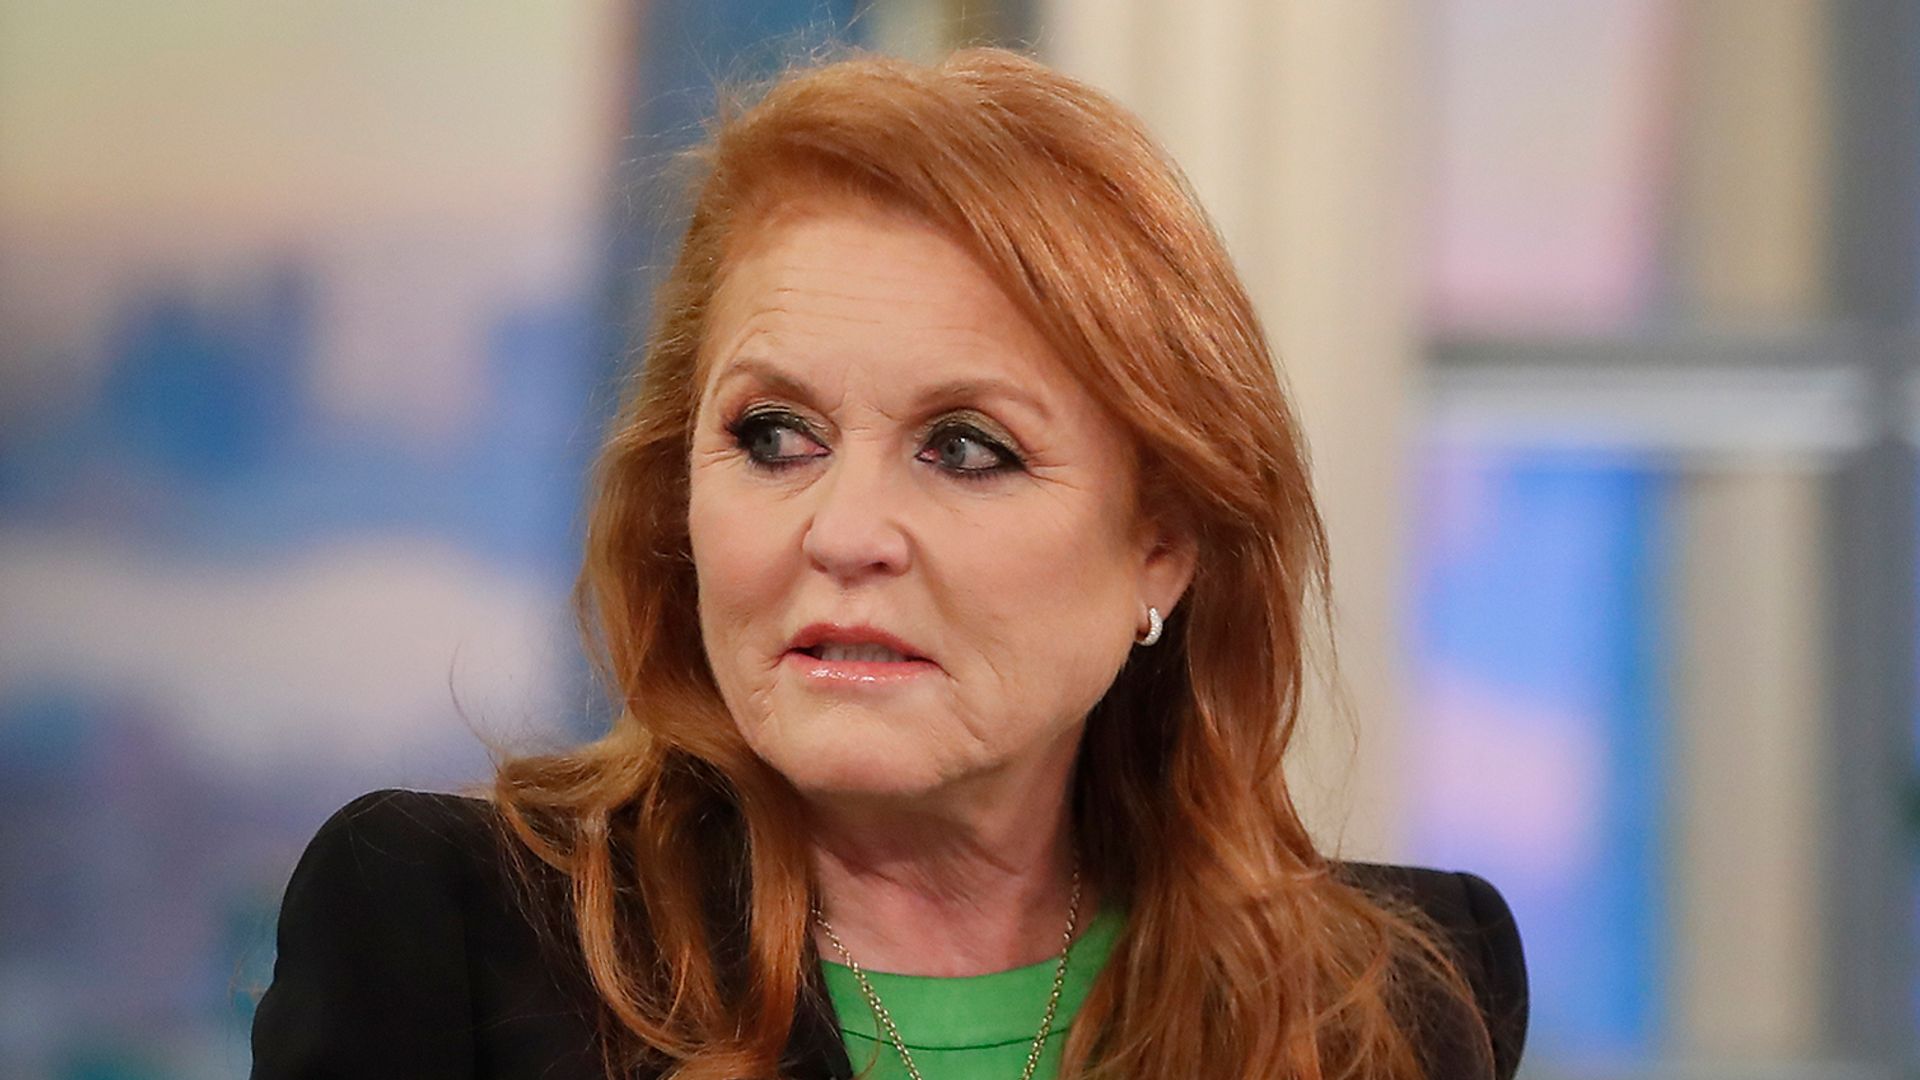 Sarah Ferguson in a green top on The View